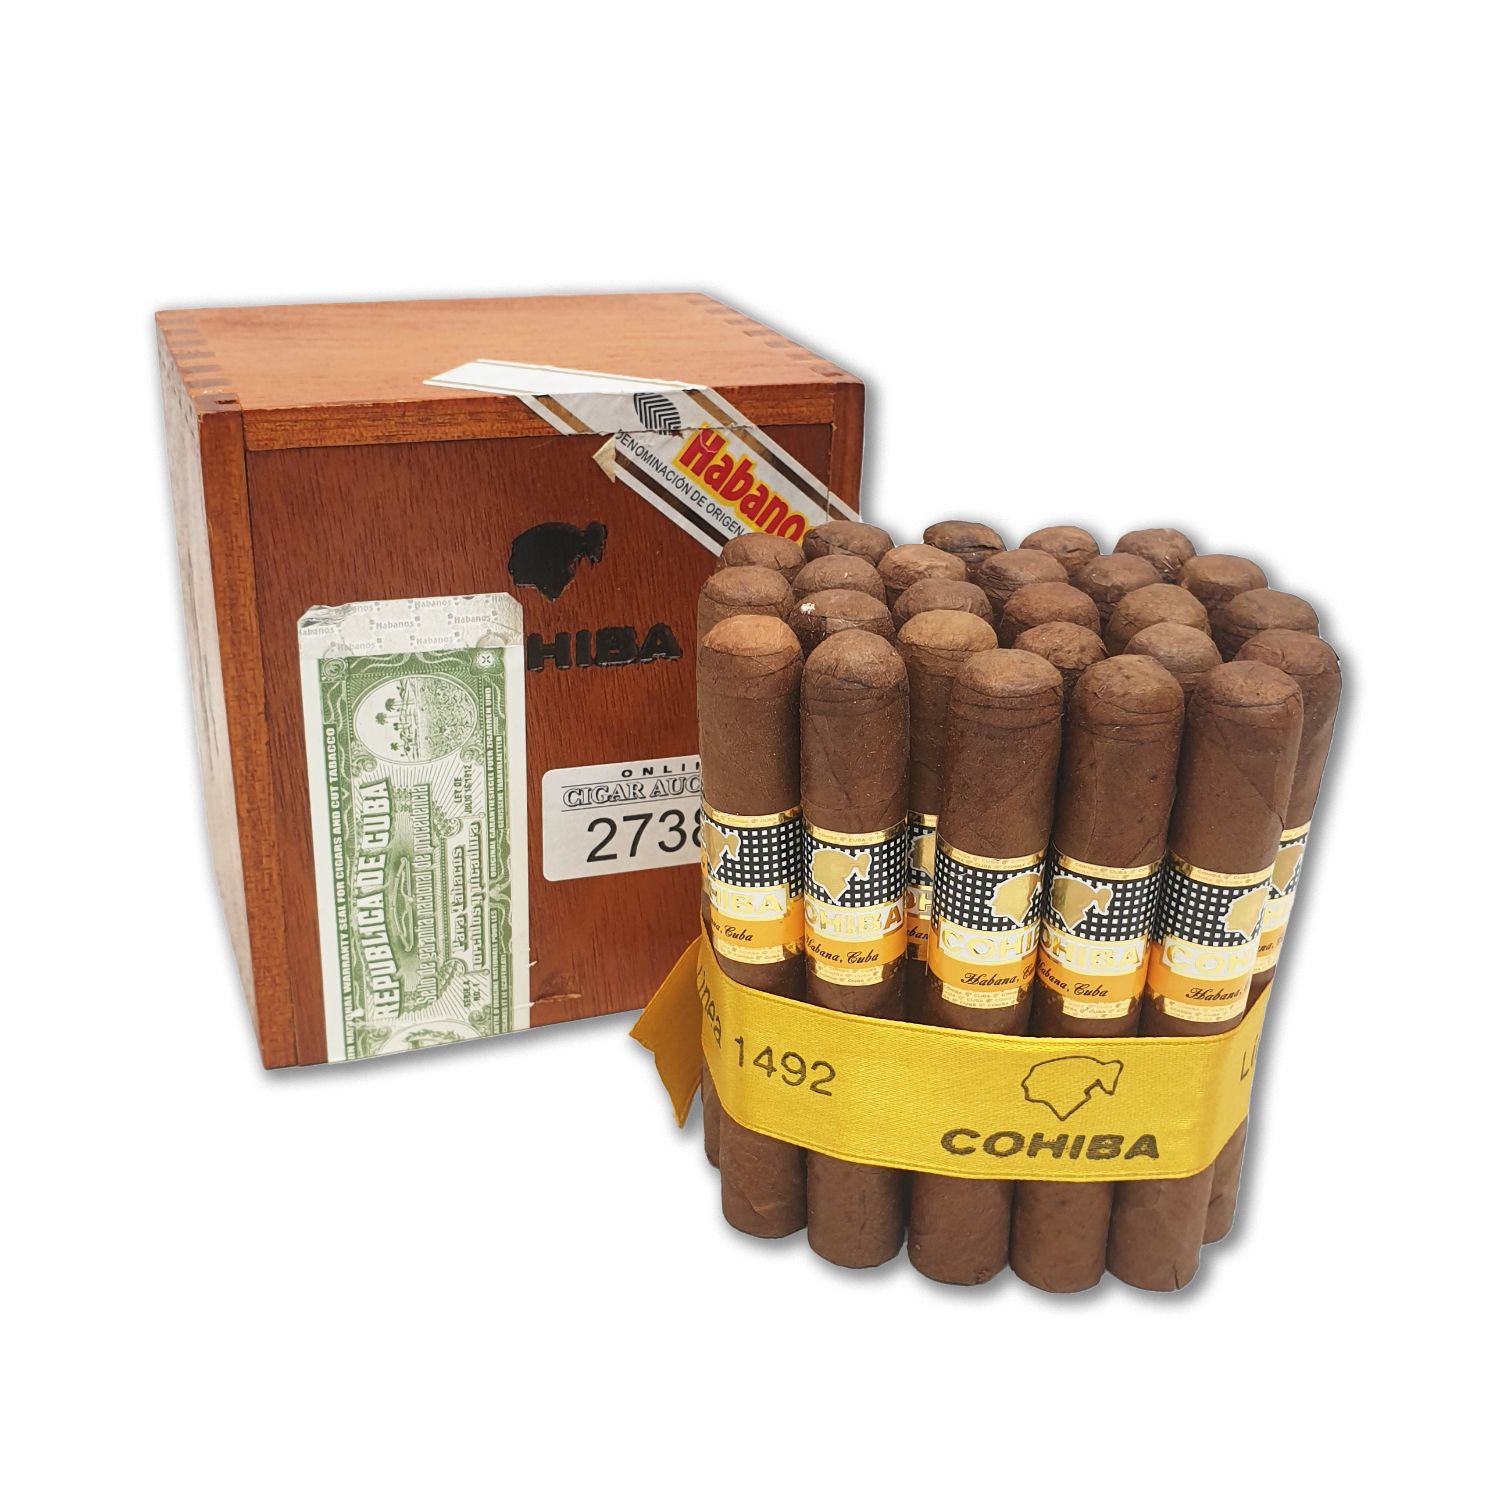 Lot 171 - Cohiba Siglo I - Mature Cigars - Uk Based Lots - from Online  Cigar Auctions